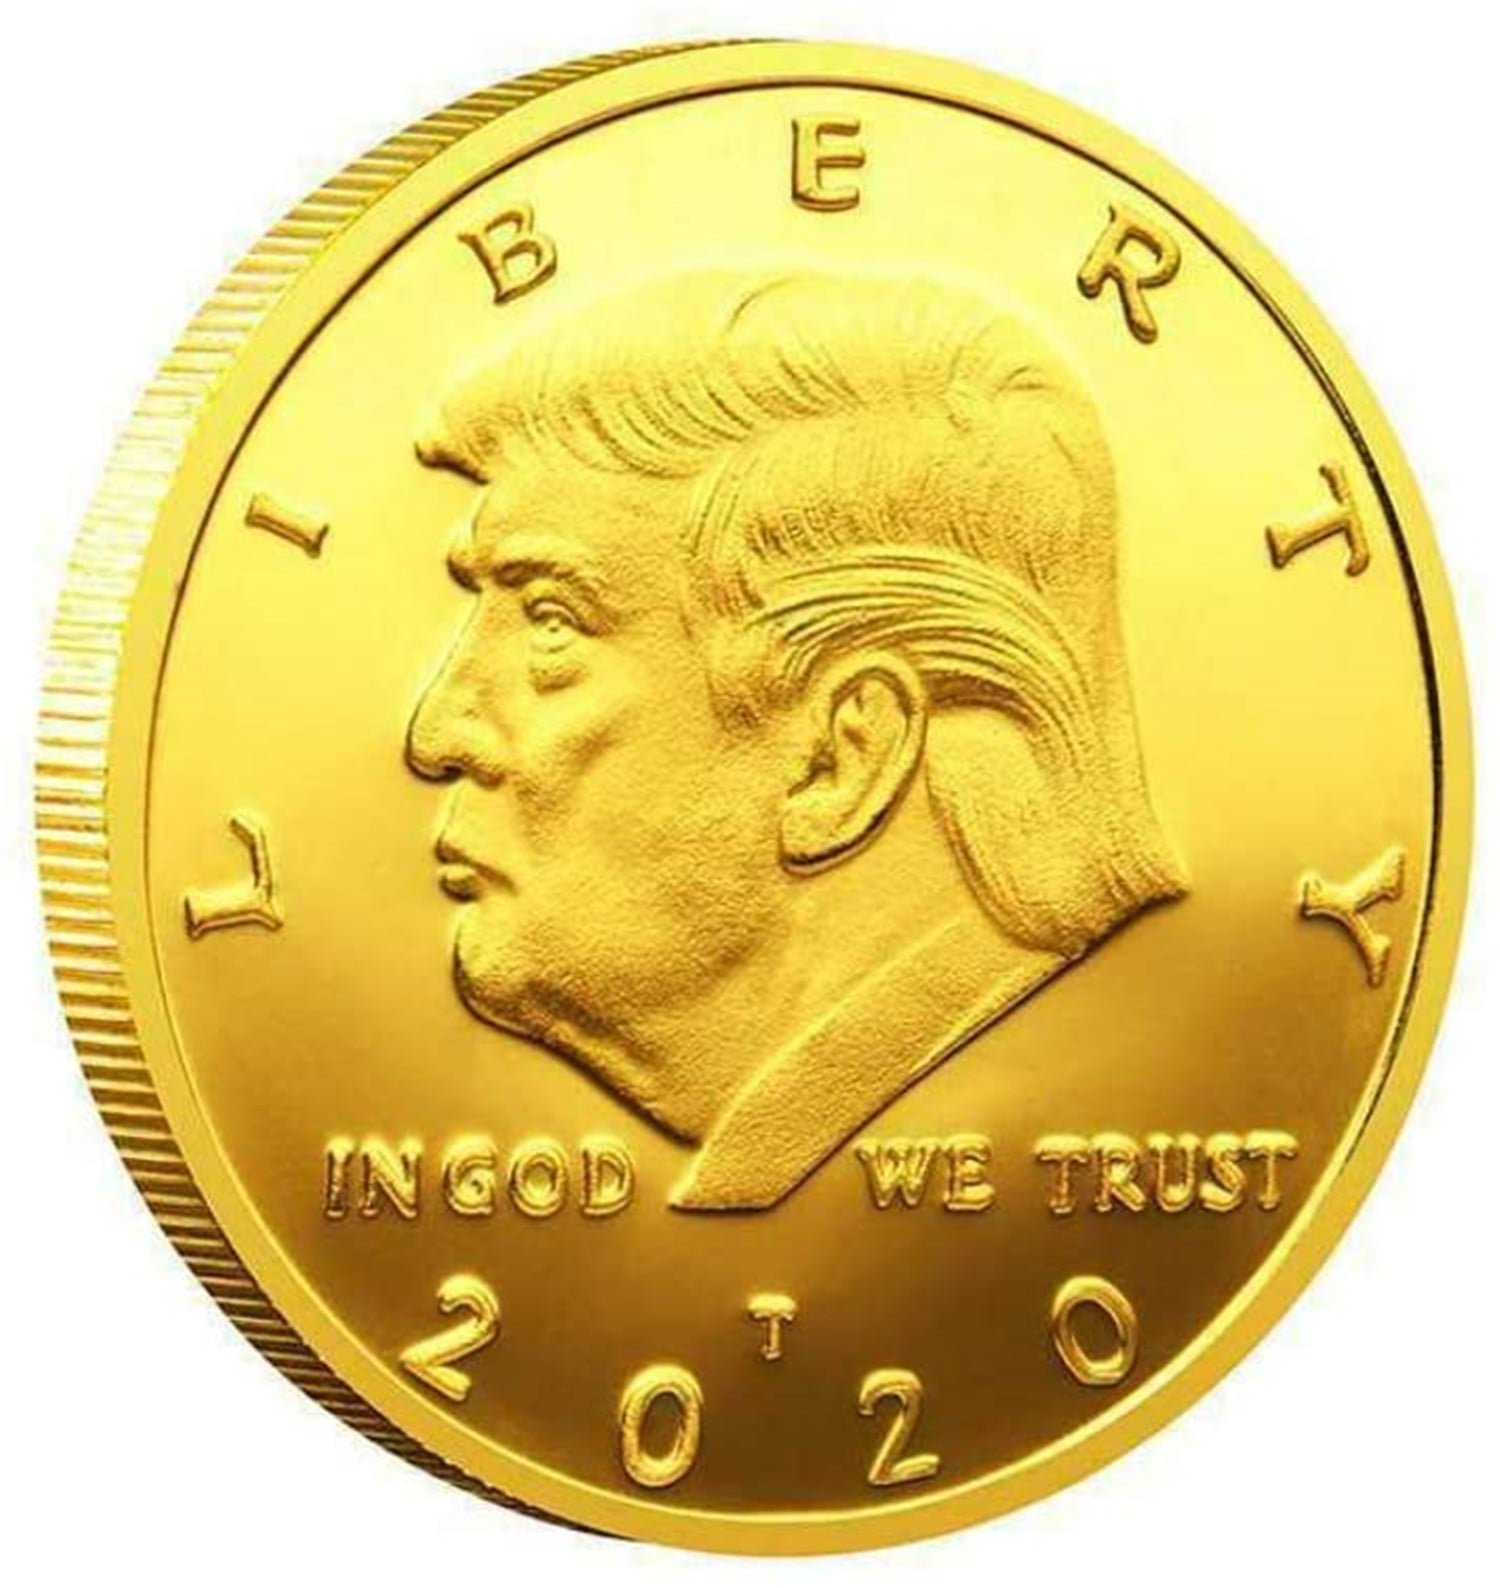 2018 PRESIDENT DONALD TRUMP 24k GOLD PLATED EAGLE COMMEMORATIVE COIN ~ A MUST 